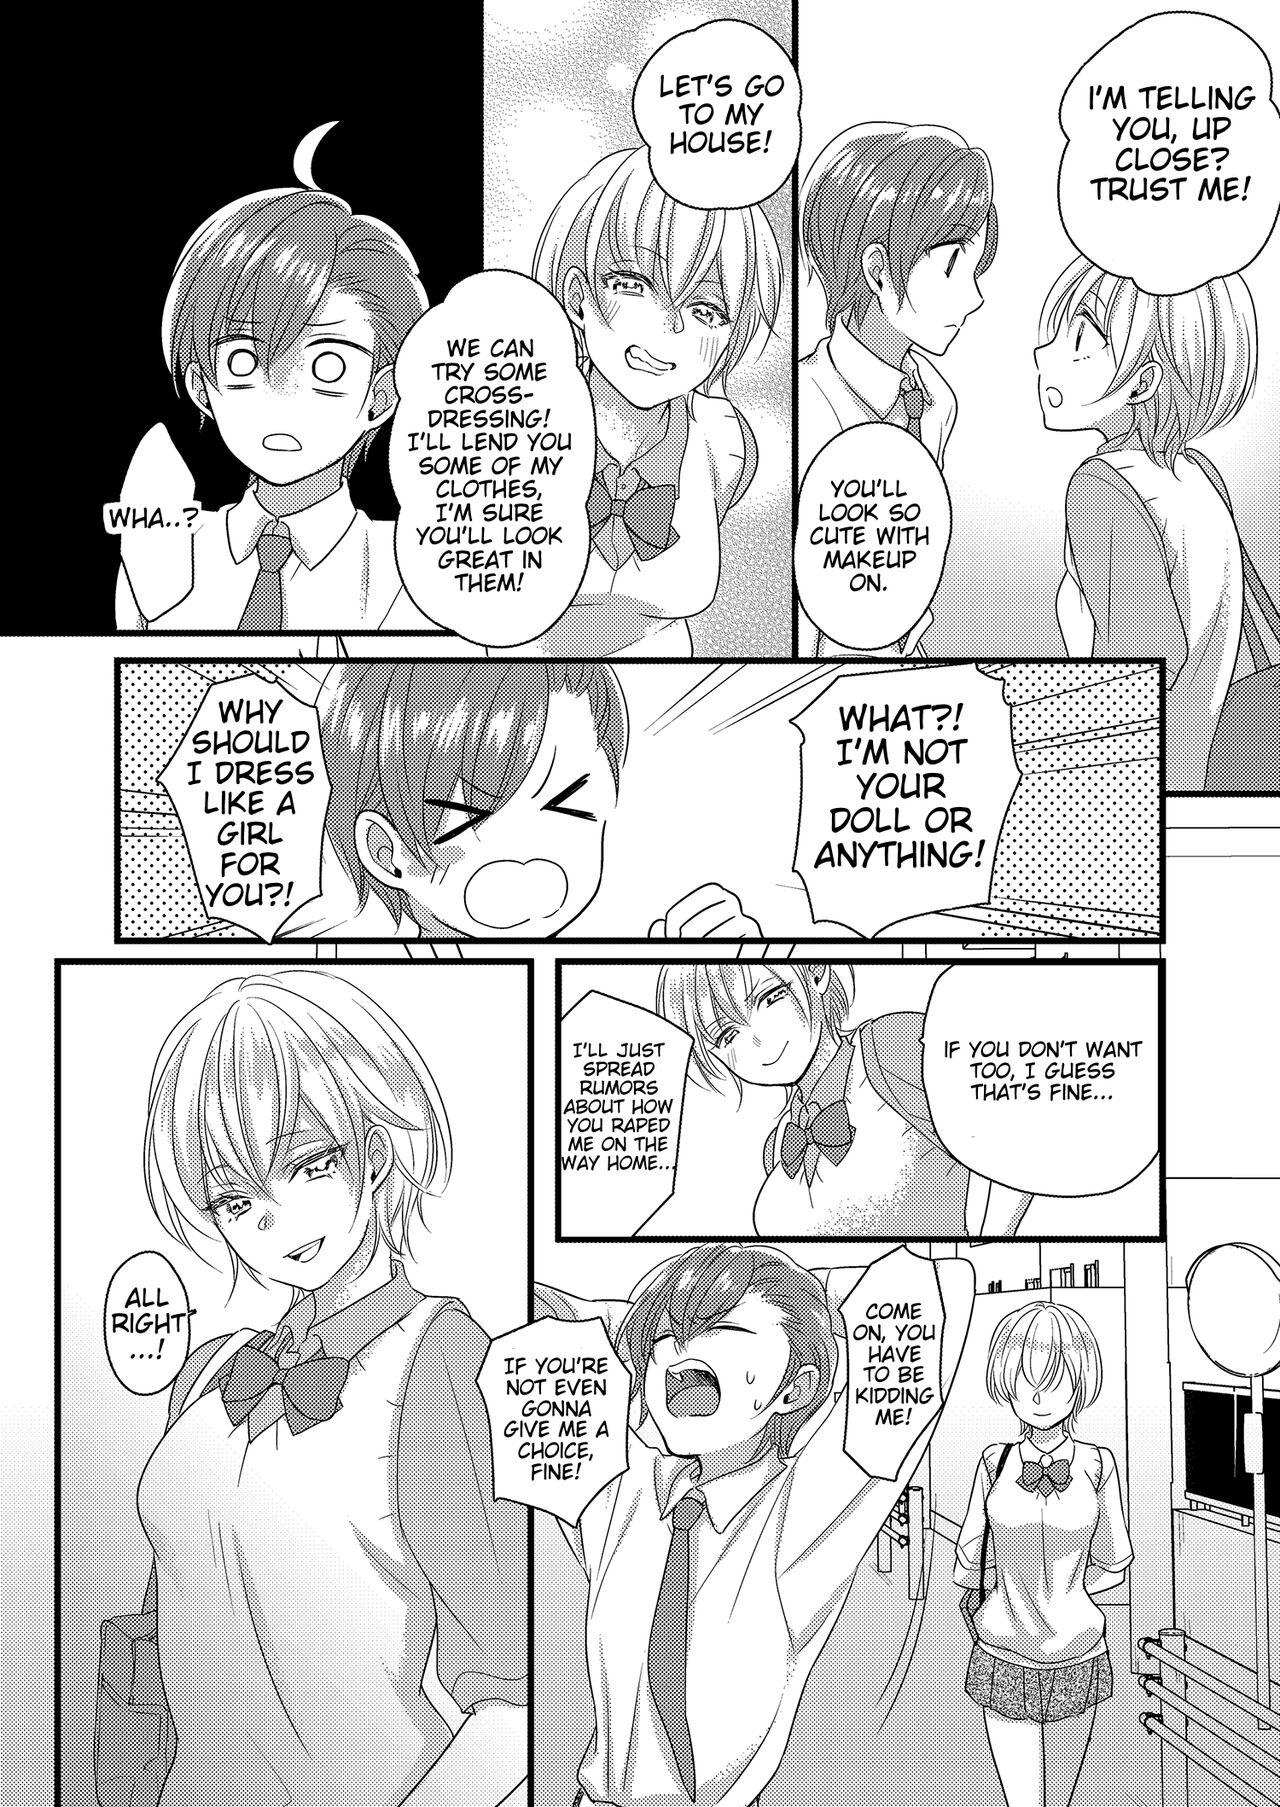 Buttplug Haru and Sana ～Love Connected Through Cosplay～ - Original Cum Swallow - Page 8